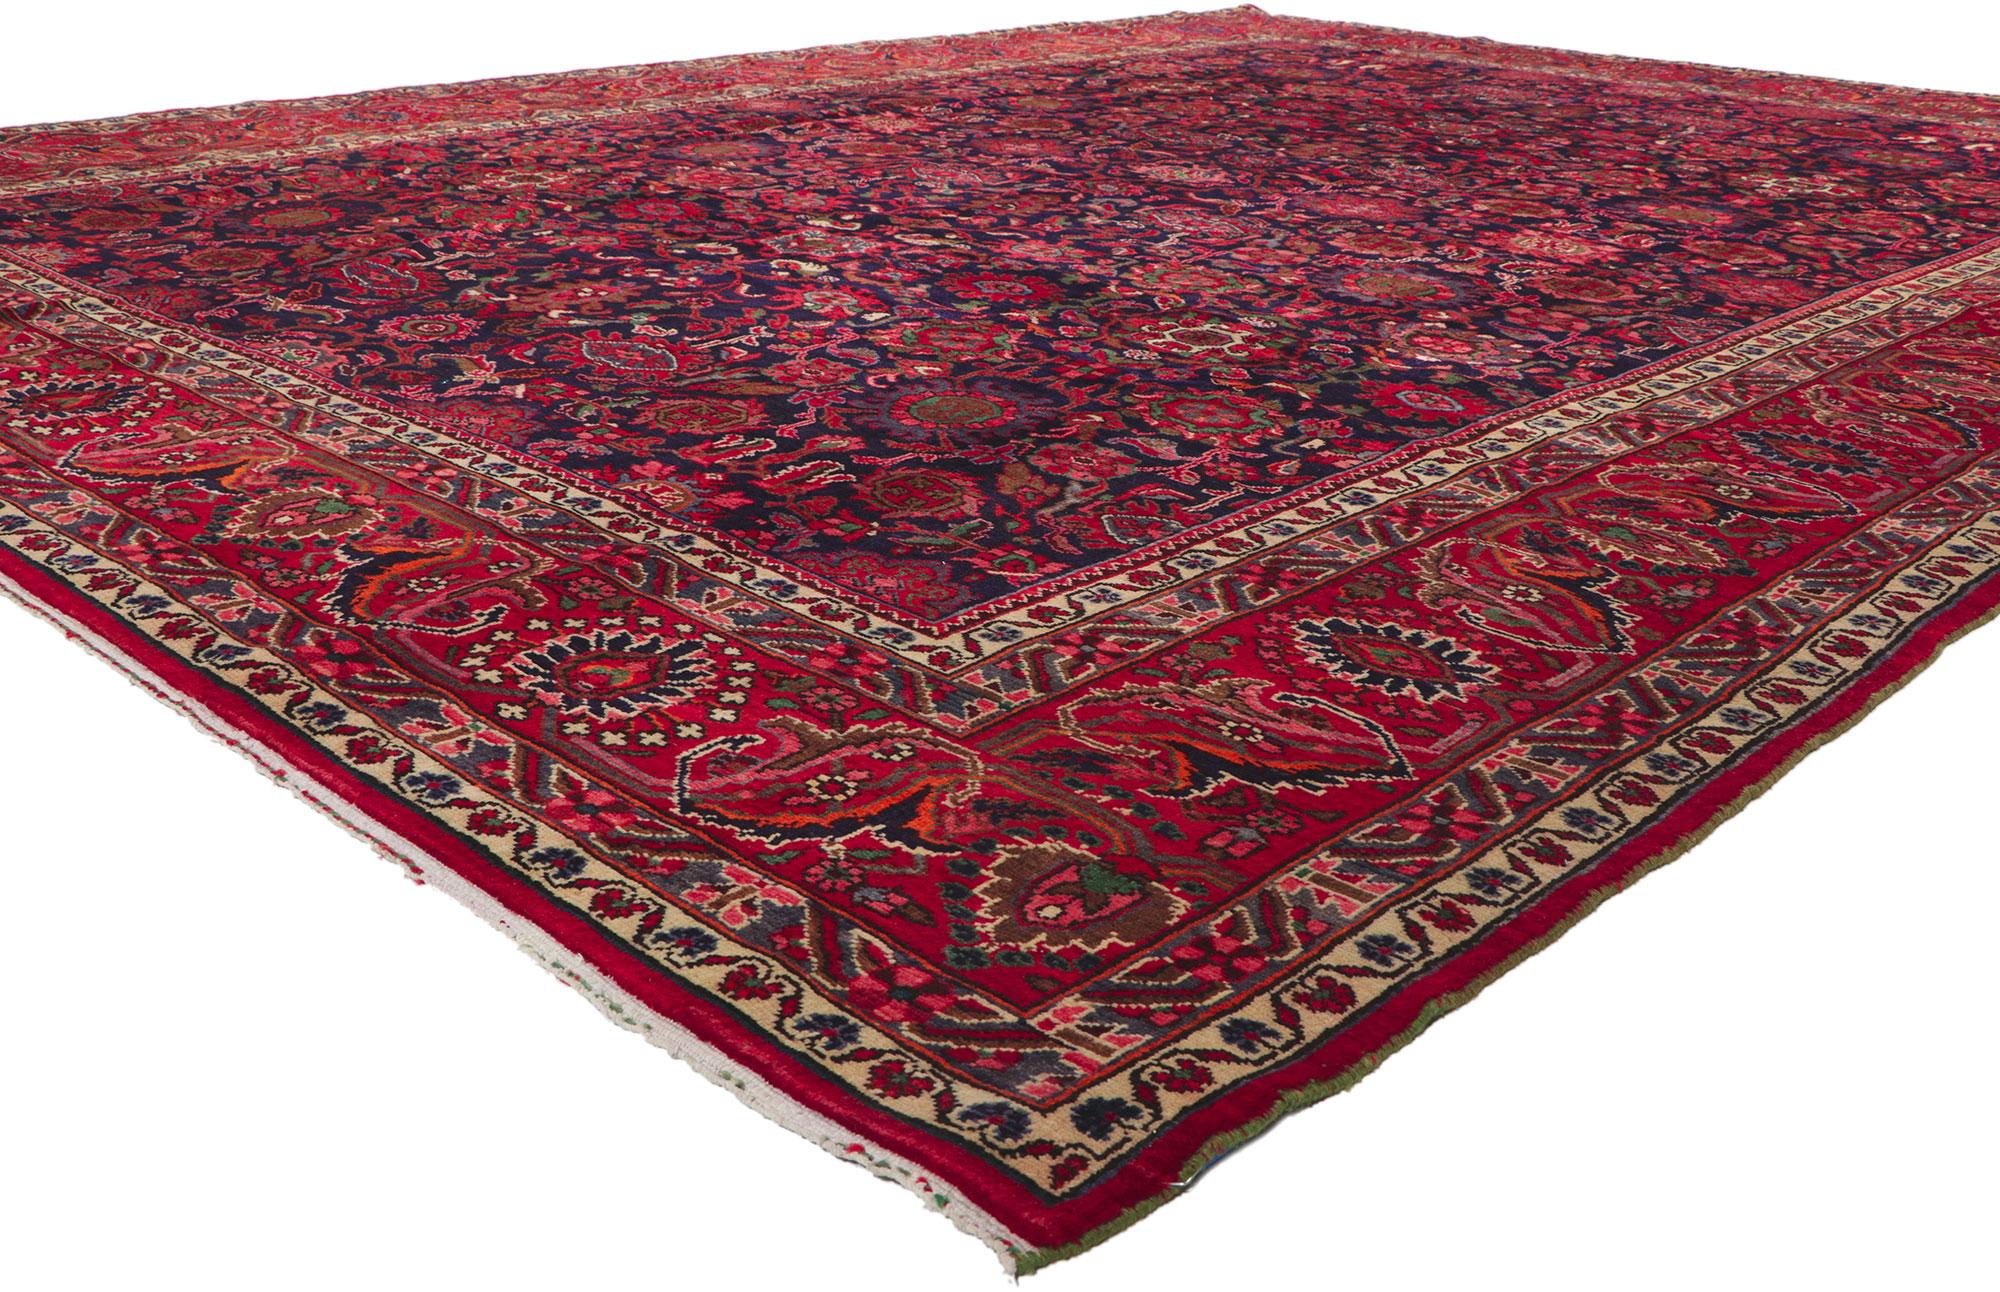 61107 Vintage Persian Malayer Rug, 10'08 x 14'03. ?Emanating a timeless design and beguiling beauty in saturated colors, this hand-knotted wool vintage Persian Malayer rug is poised to impress. An allover repeating botanical pattern spread across